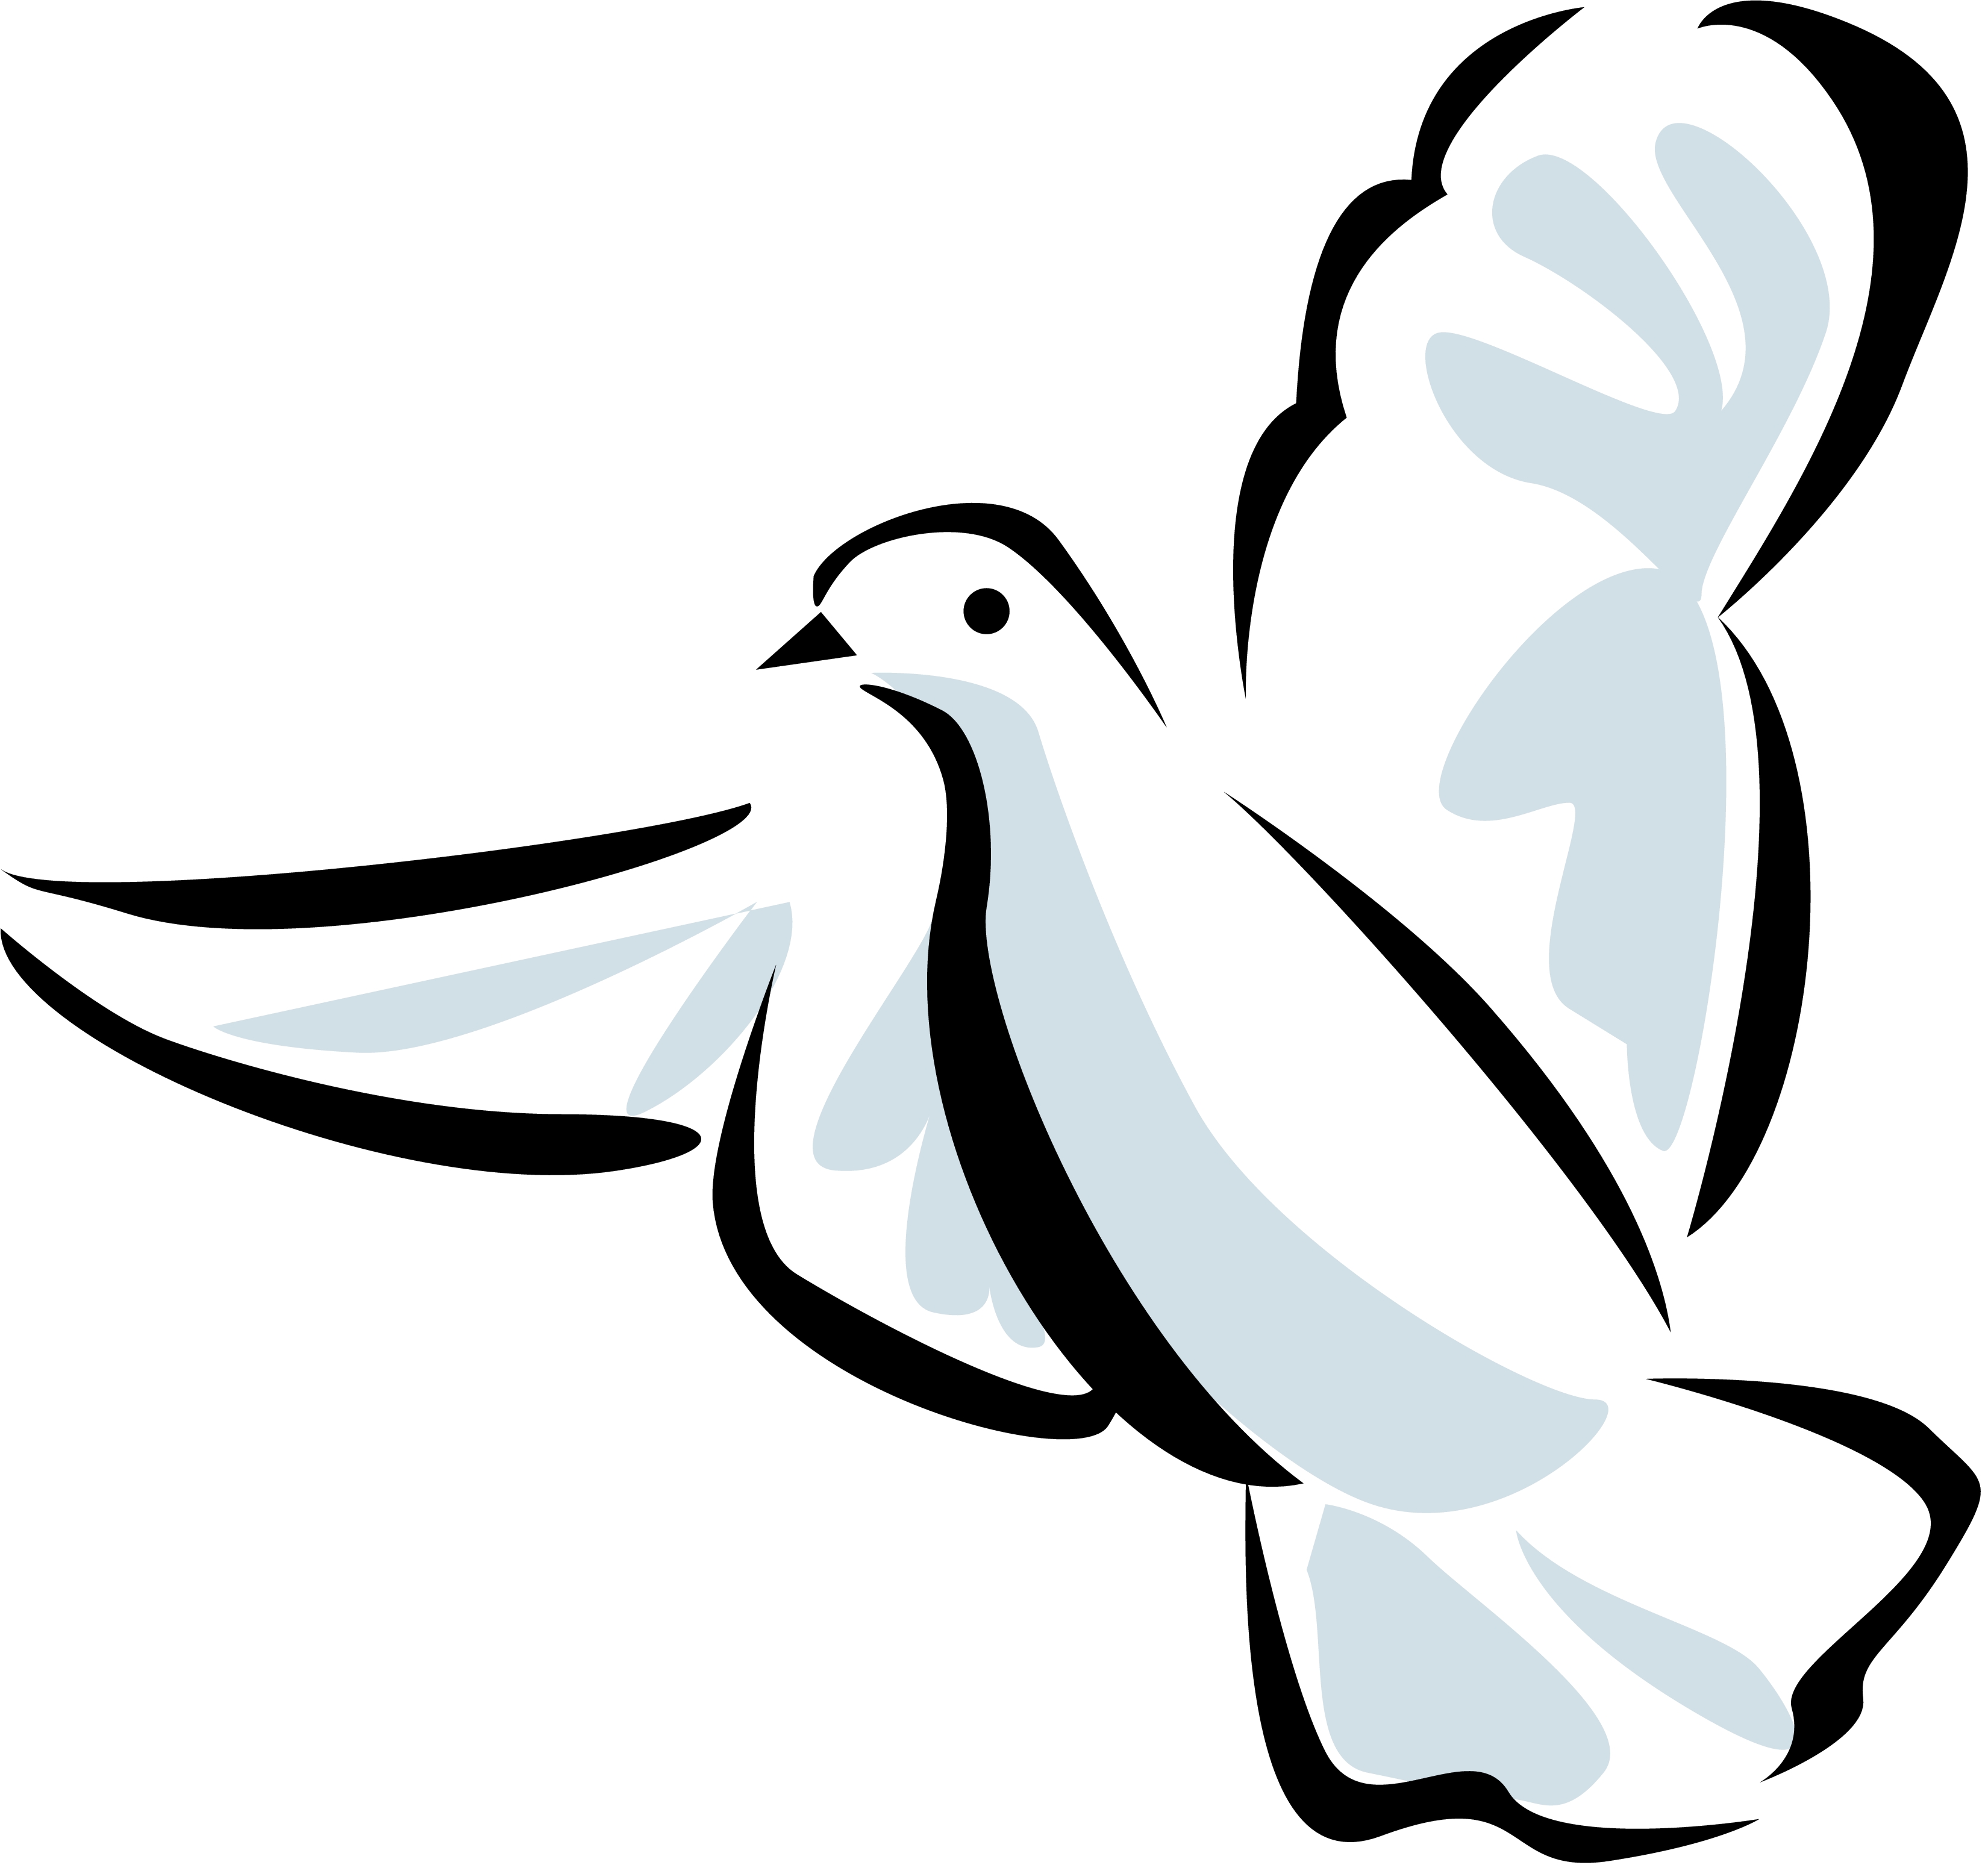 free christian clipart of doves - photo #28